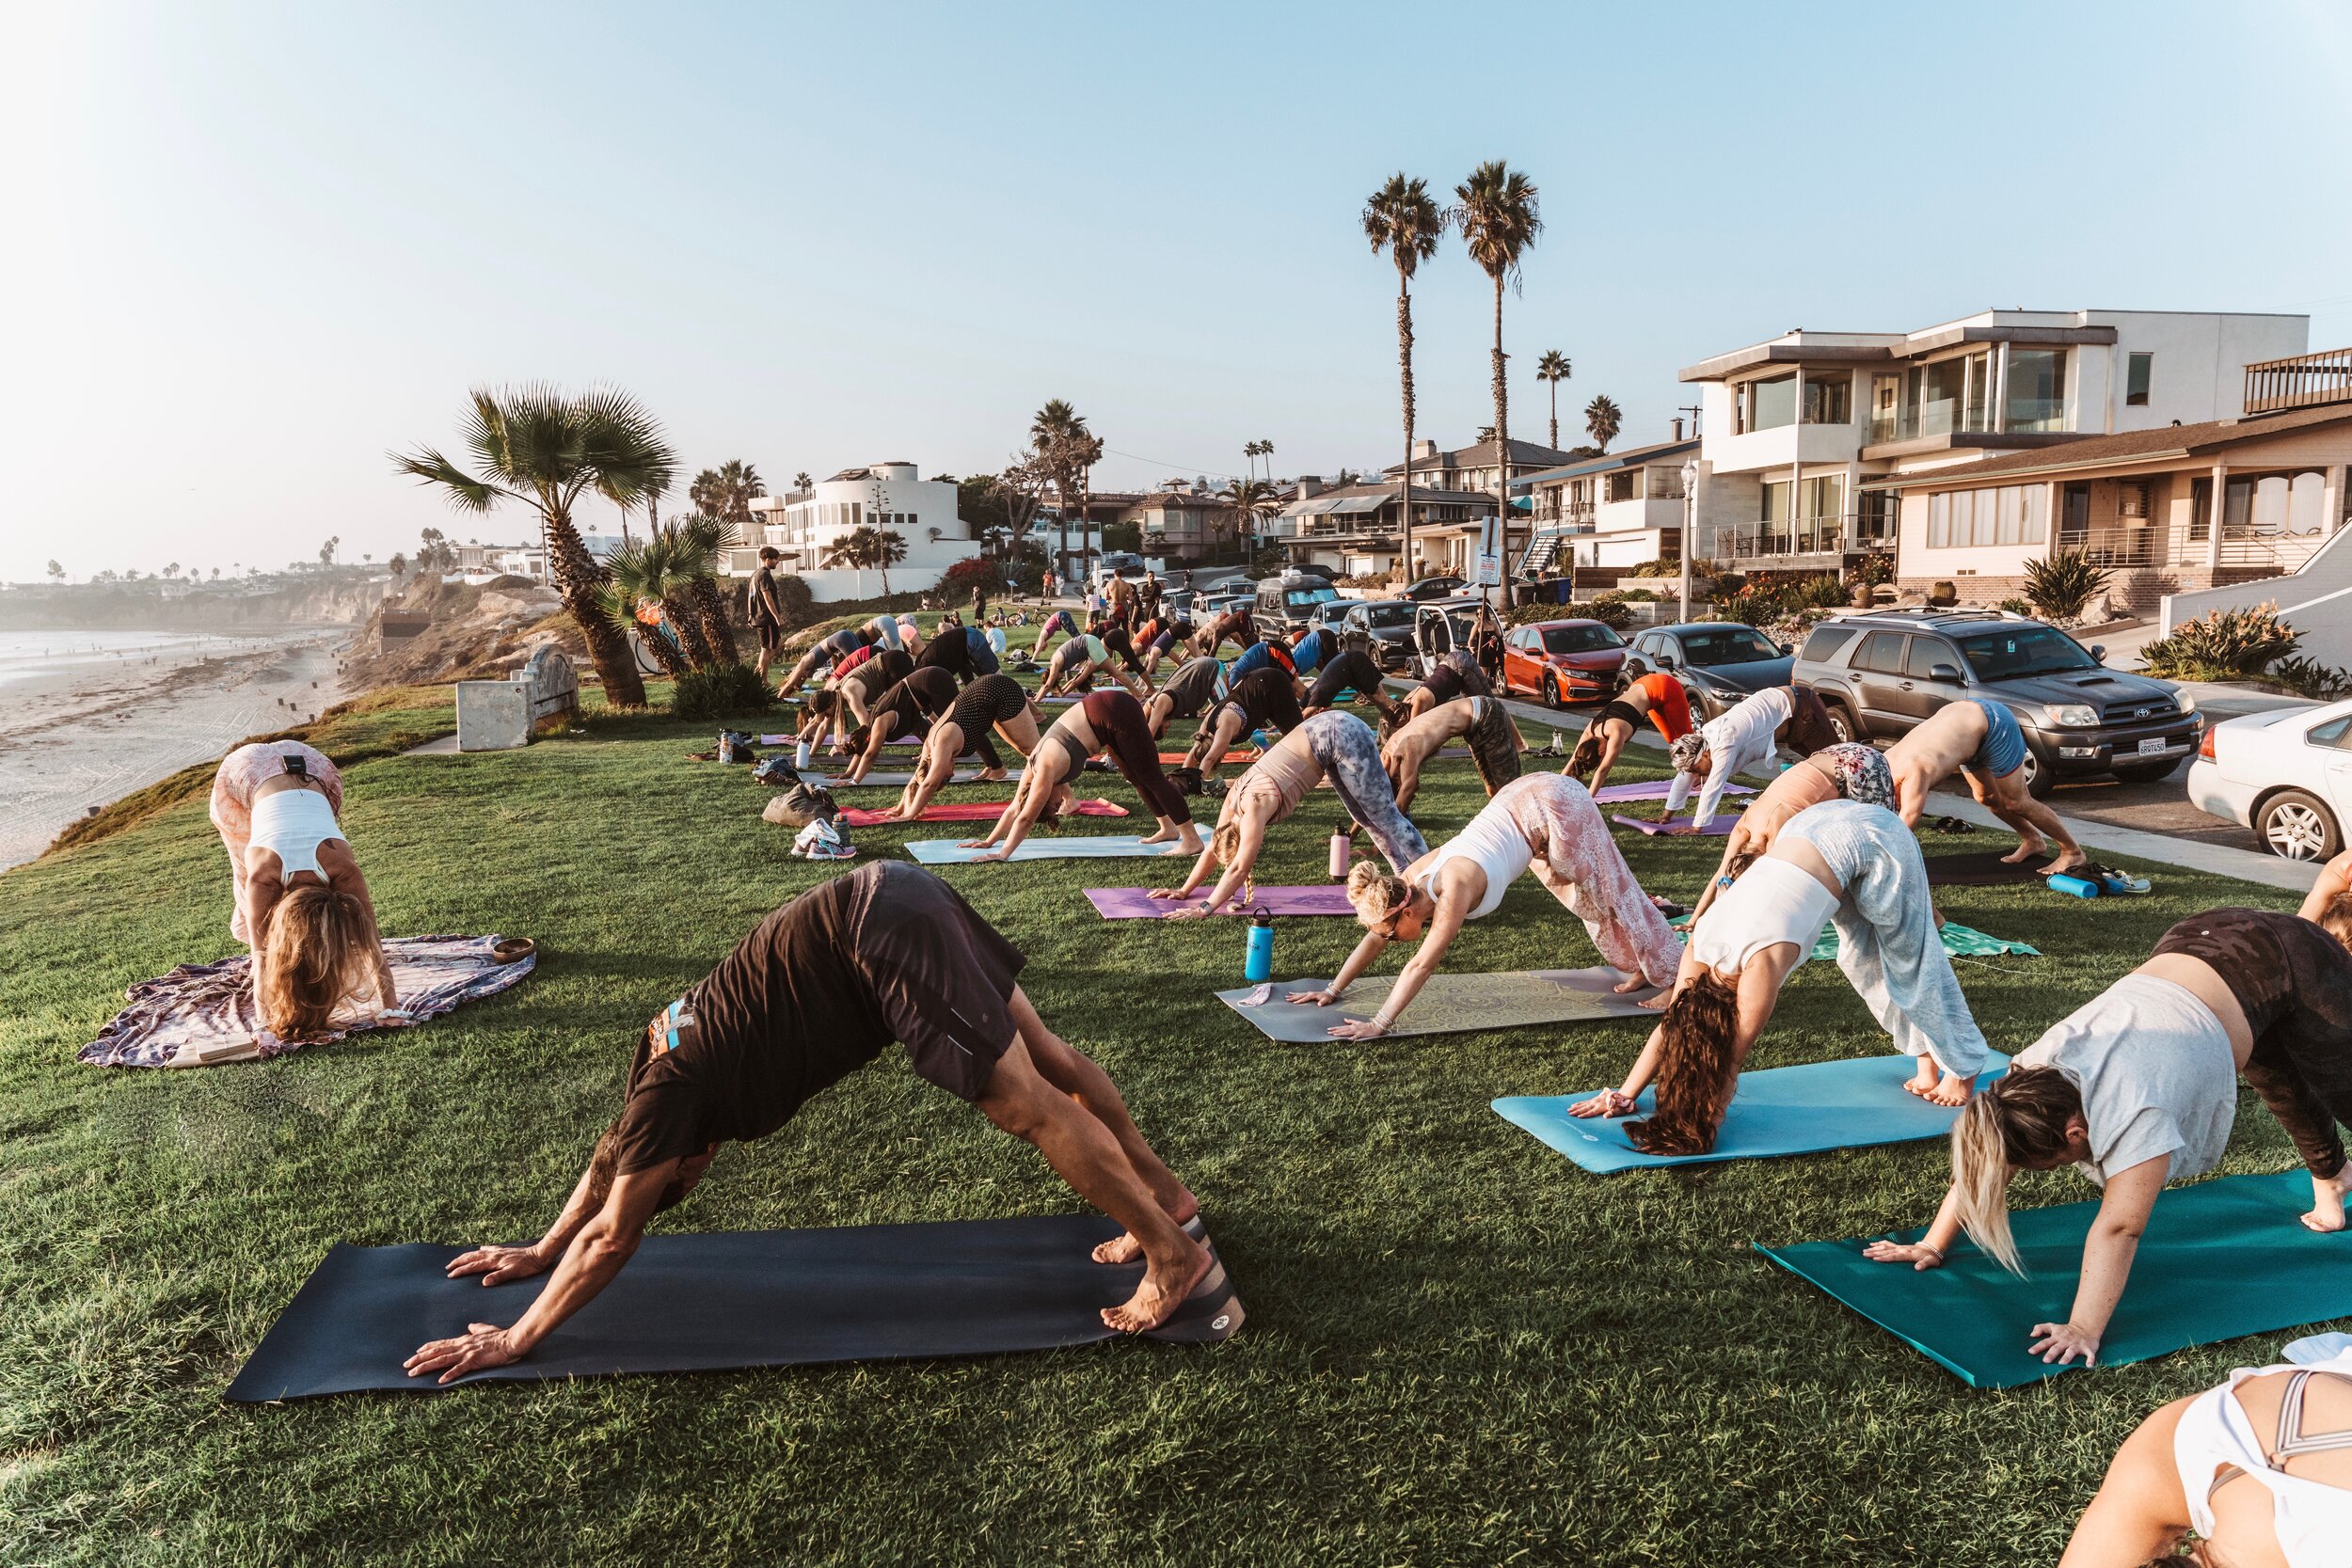 Get Back in the Flow! Free Outdoor Yoga Classes - Gwinnett Magazine